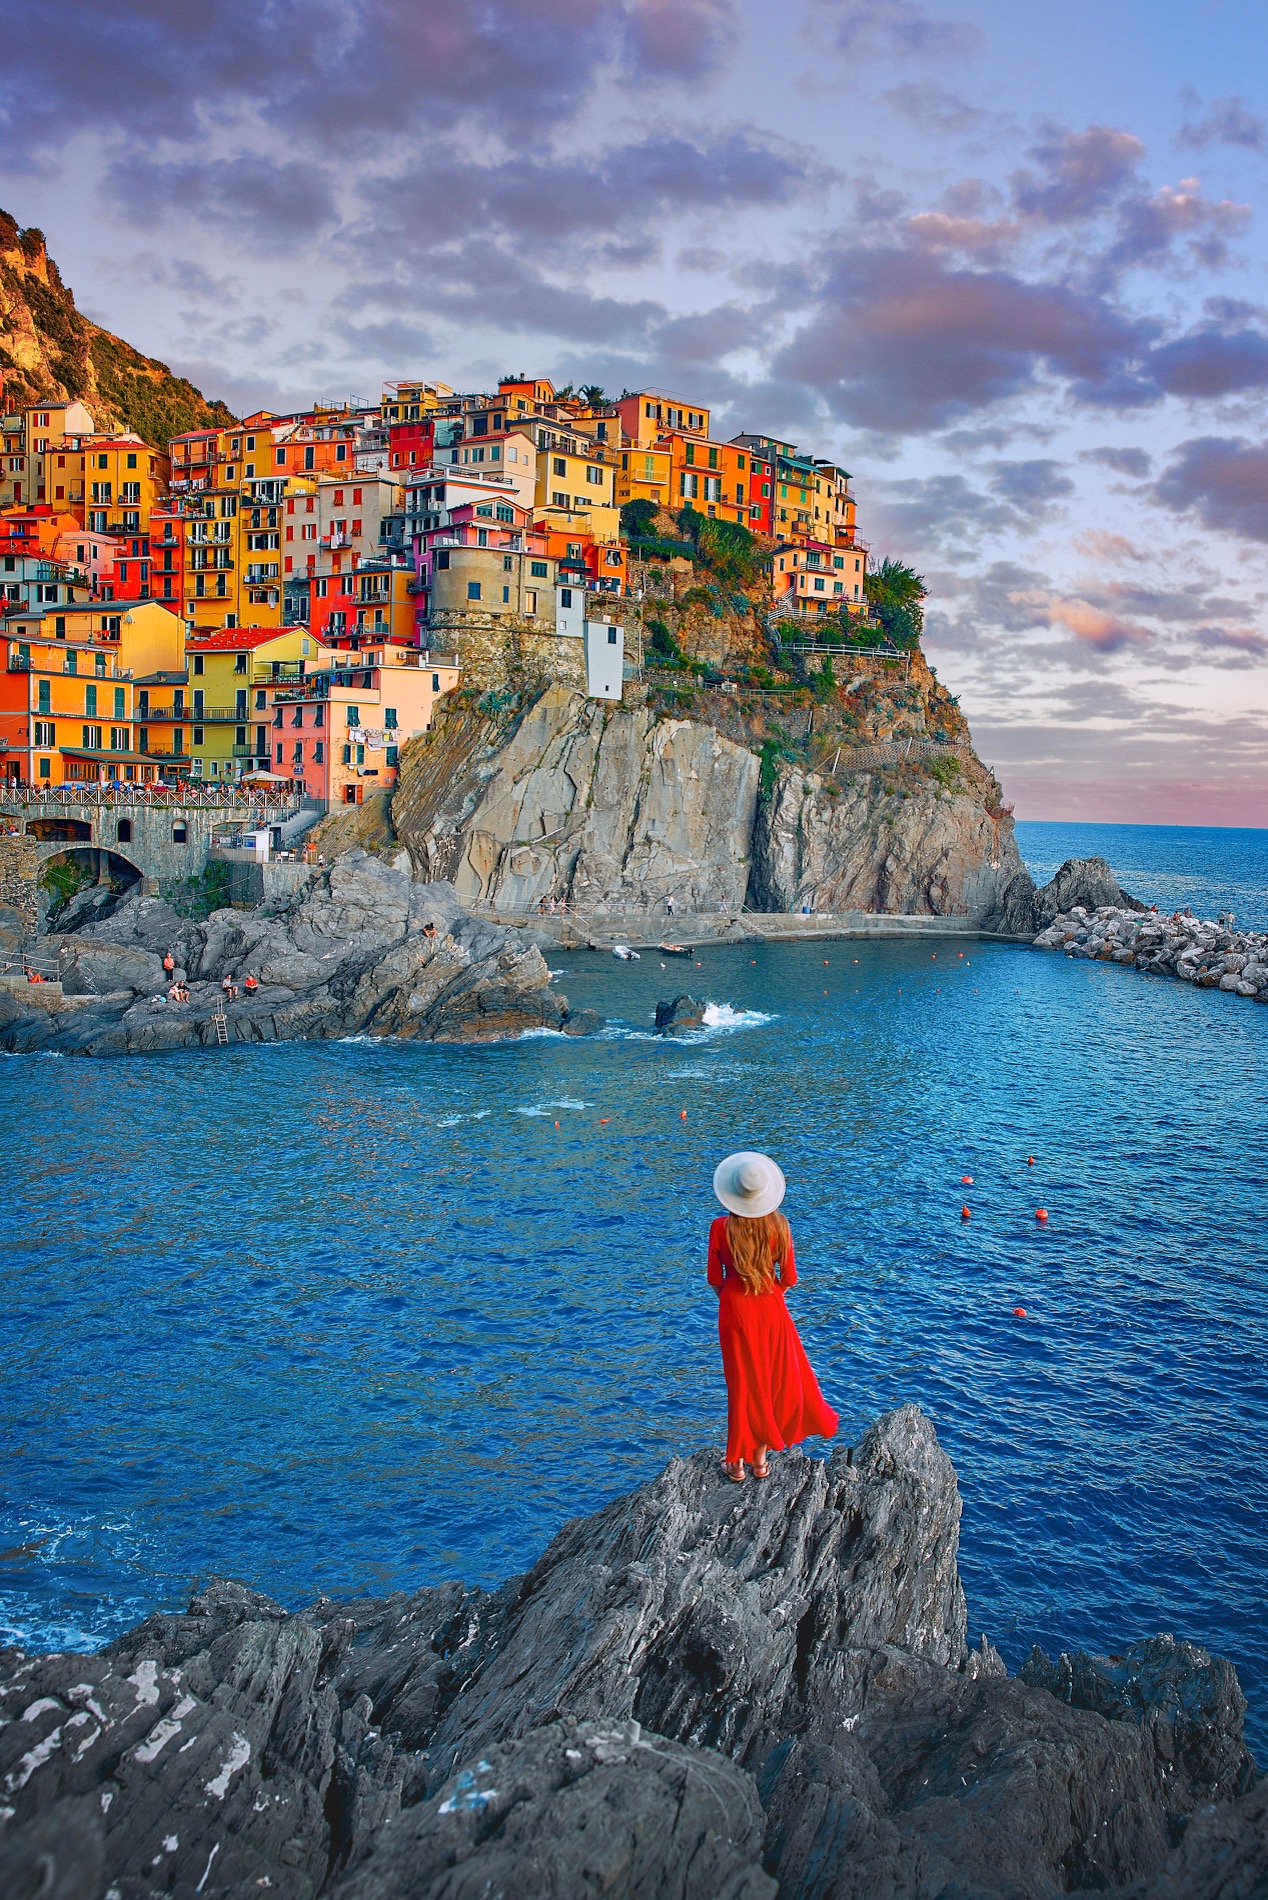 Woman in sun hat and red dress standing on a rock overlooking a bay under a colorful Cinque Terre village at sunset.